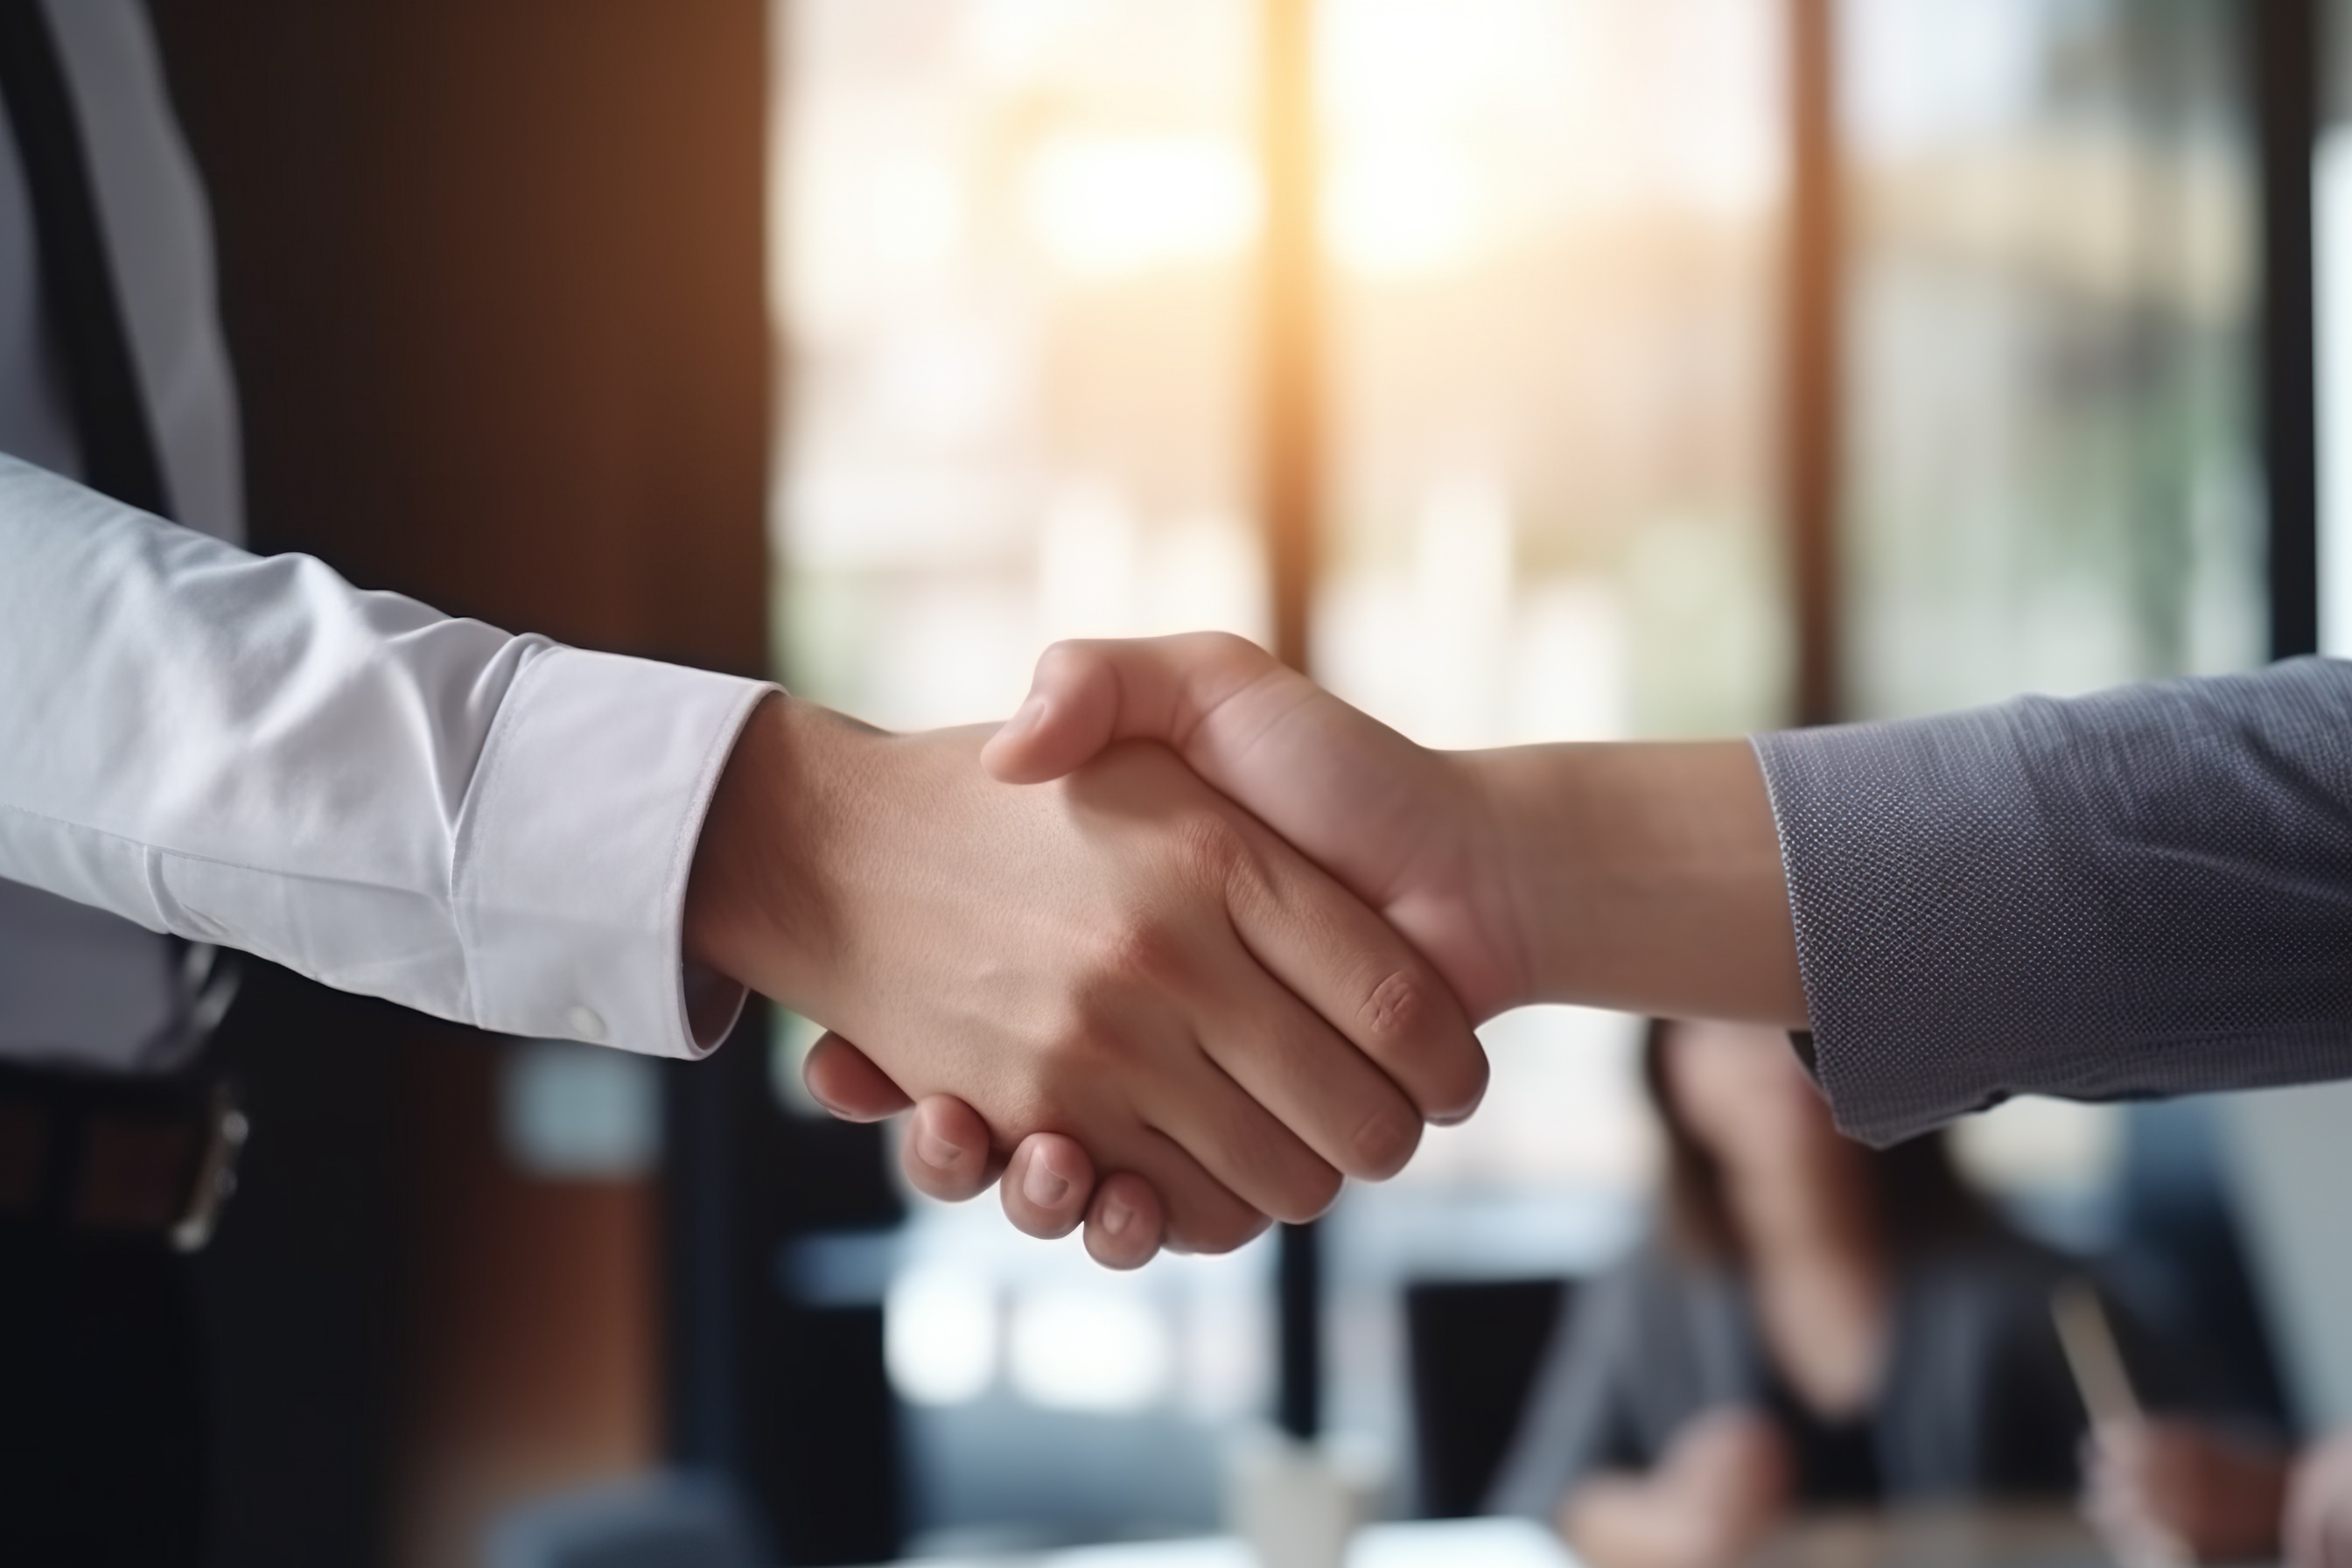 Close-up shot of hand shake, business shaking hands, finishing up meeting. Successful businessmen handshaking after meeting